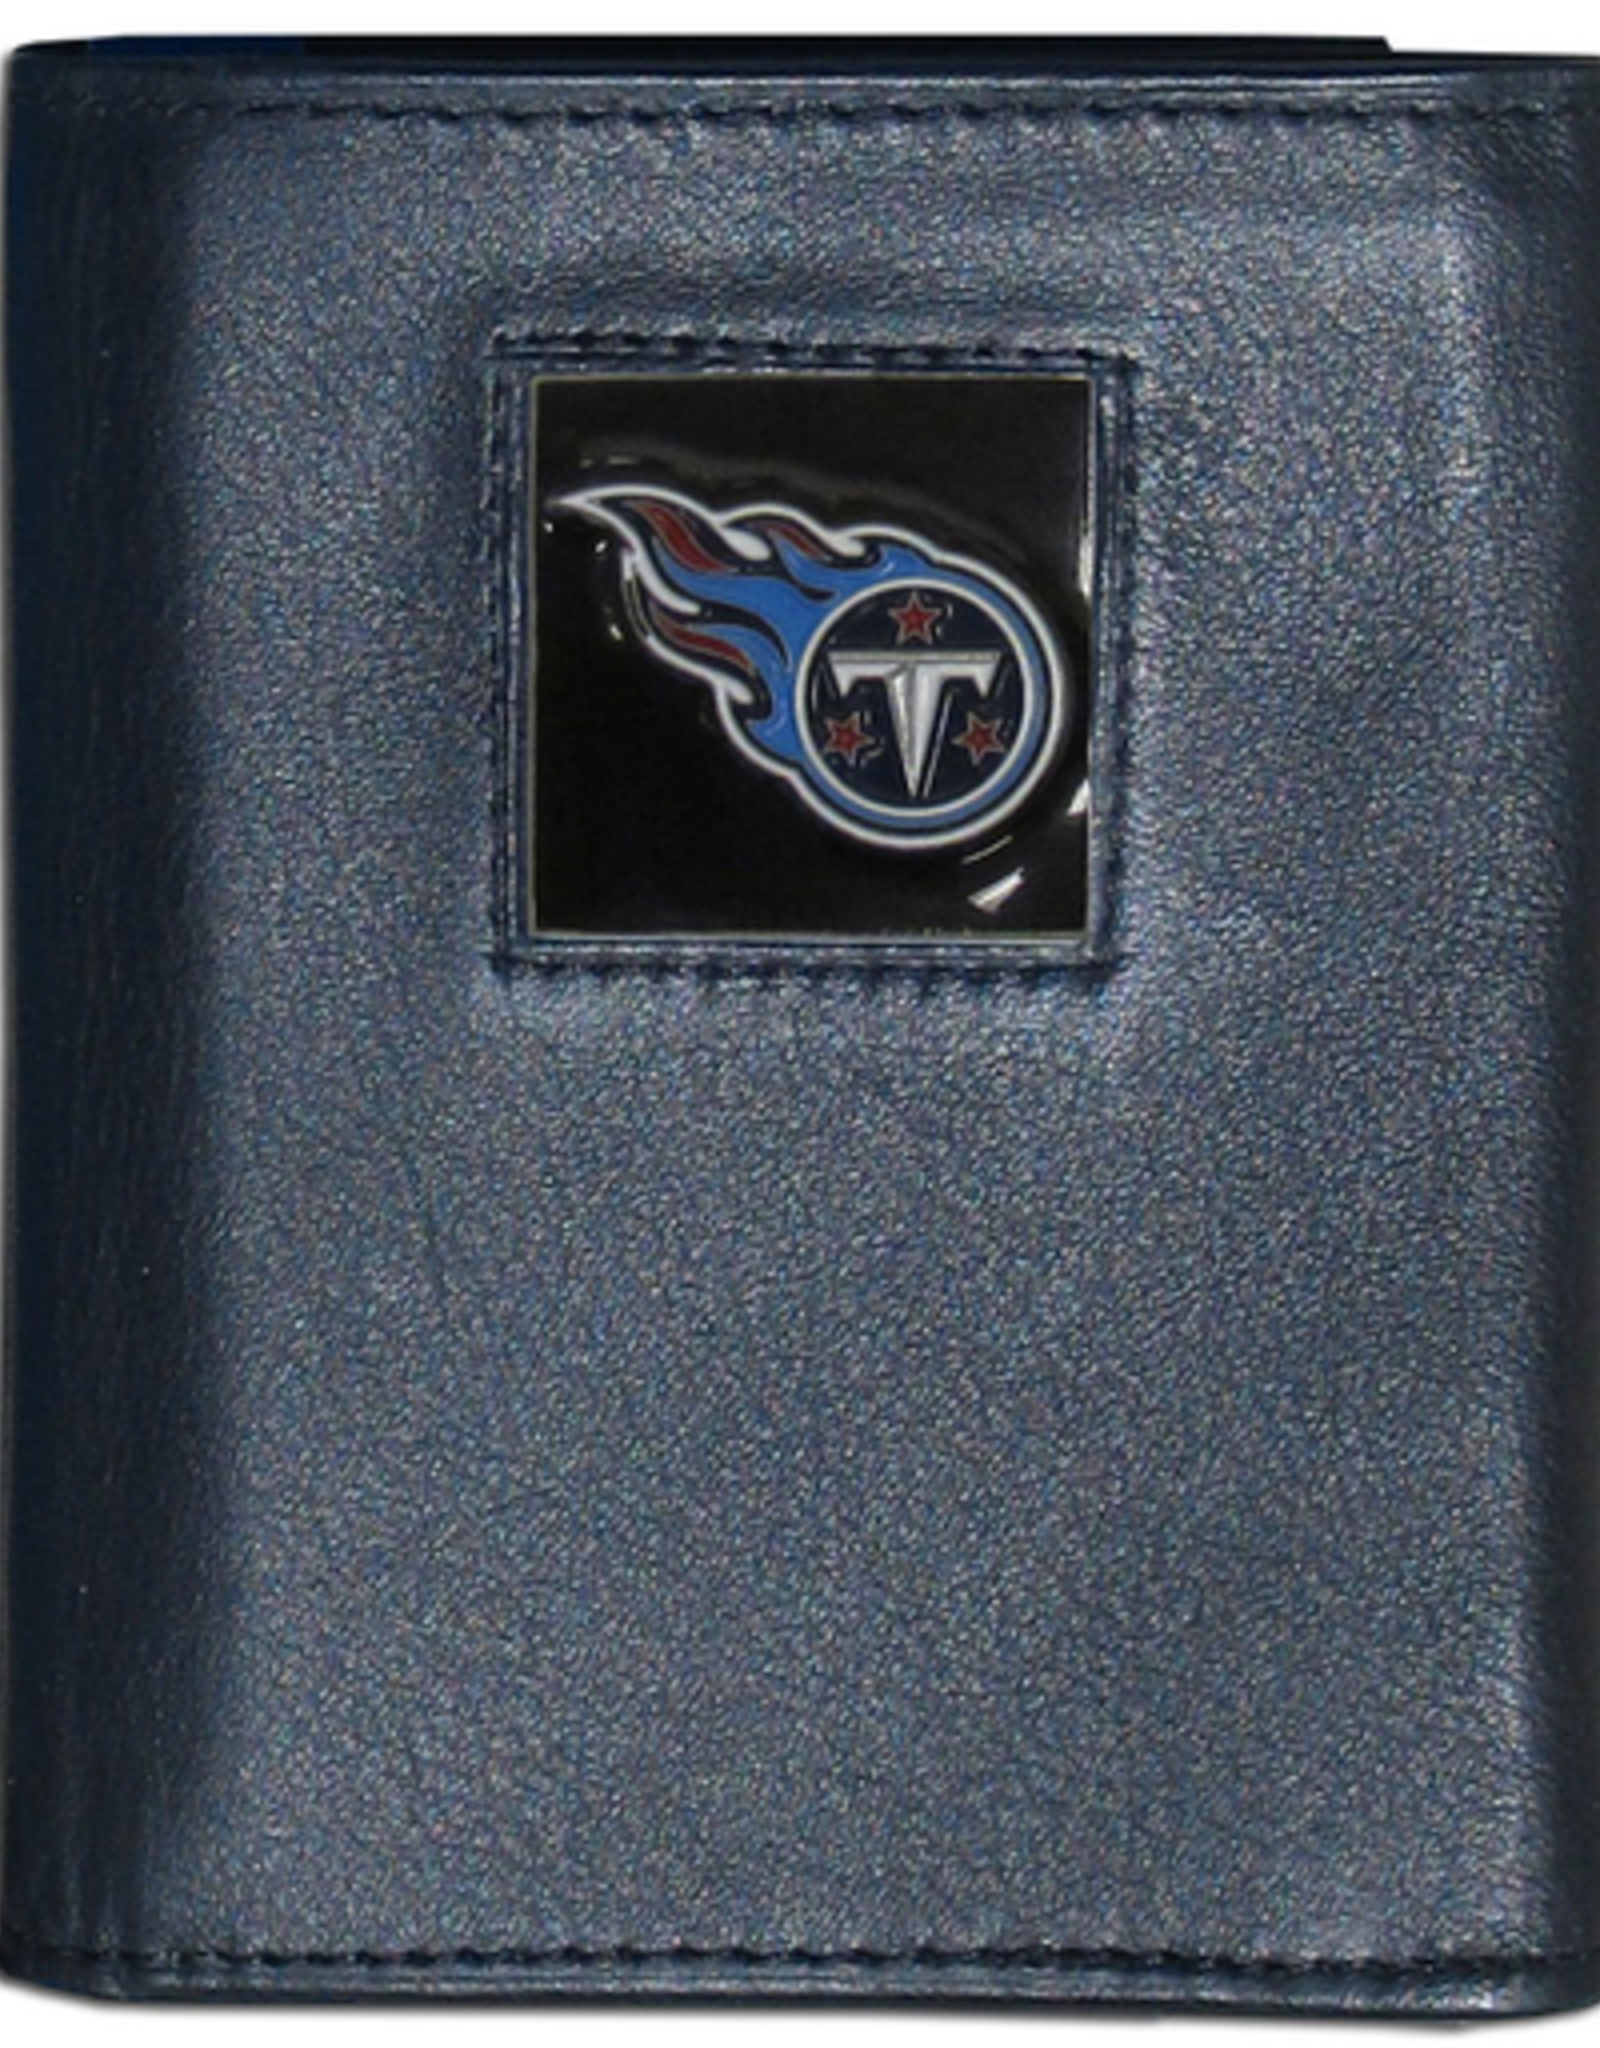 SISKIYOU GIFTS Tennessee Titans Executive Leather Trifold Wallet